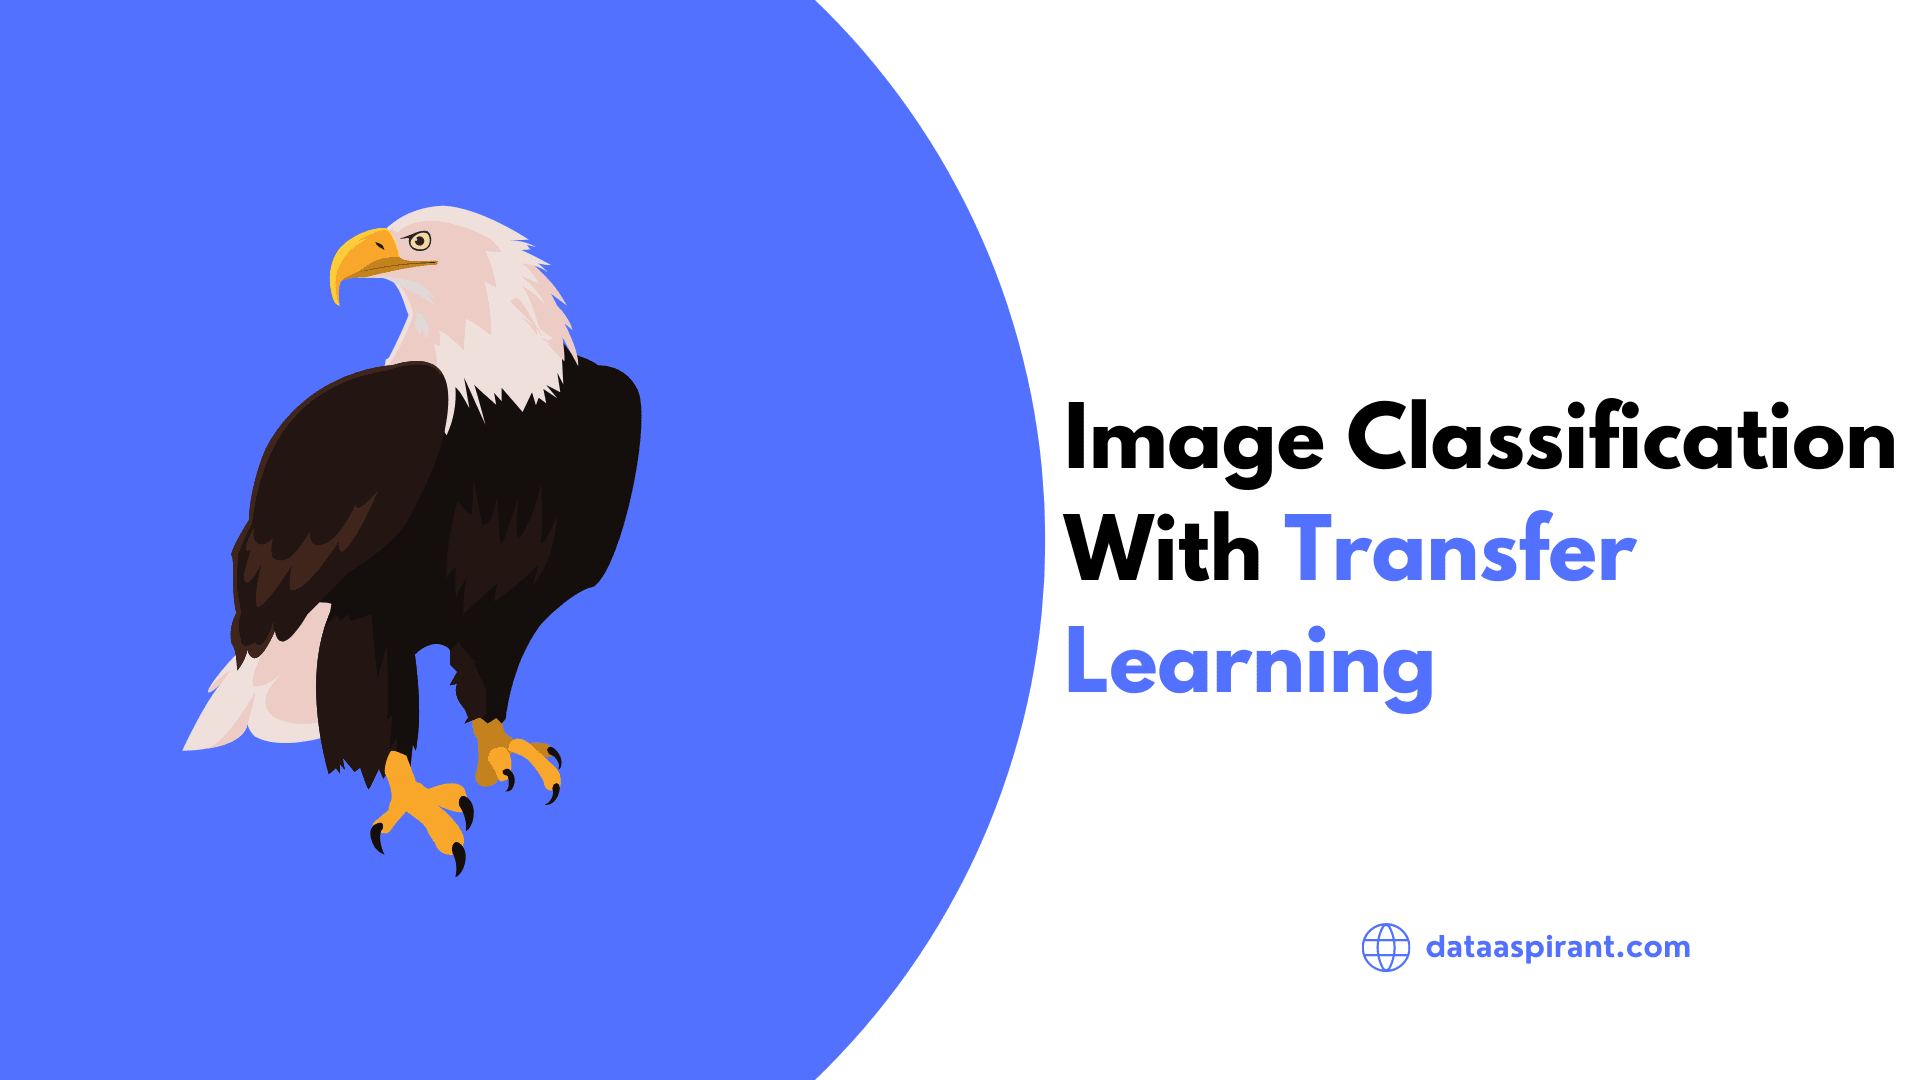 Image Classification with Transfer Learning